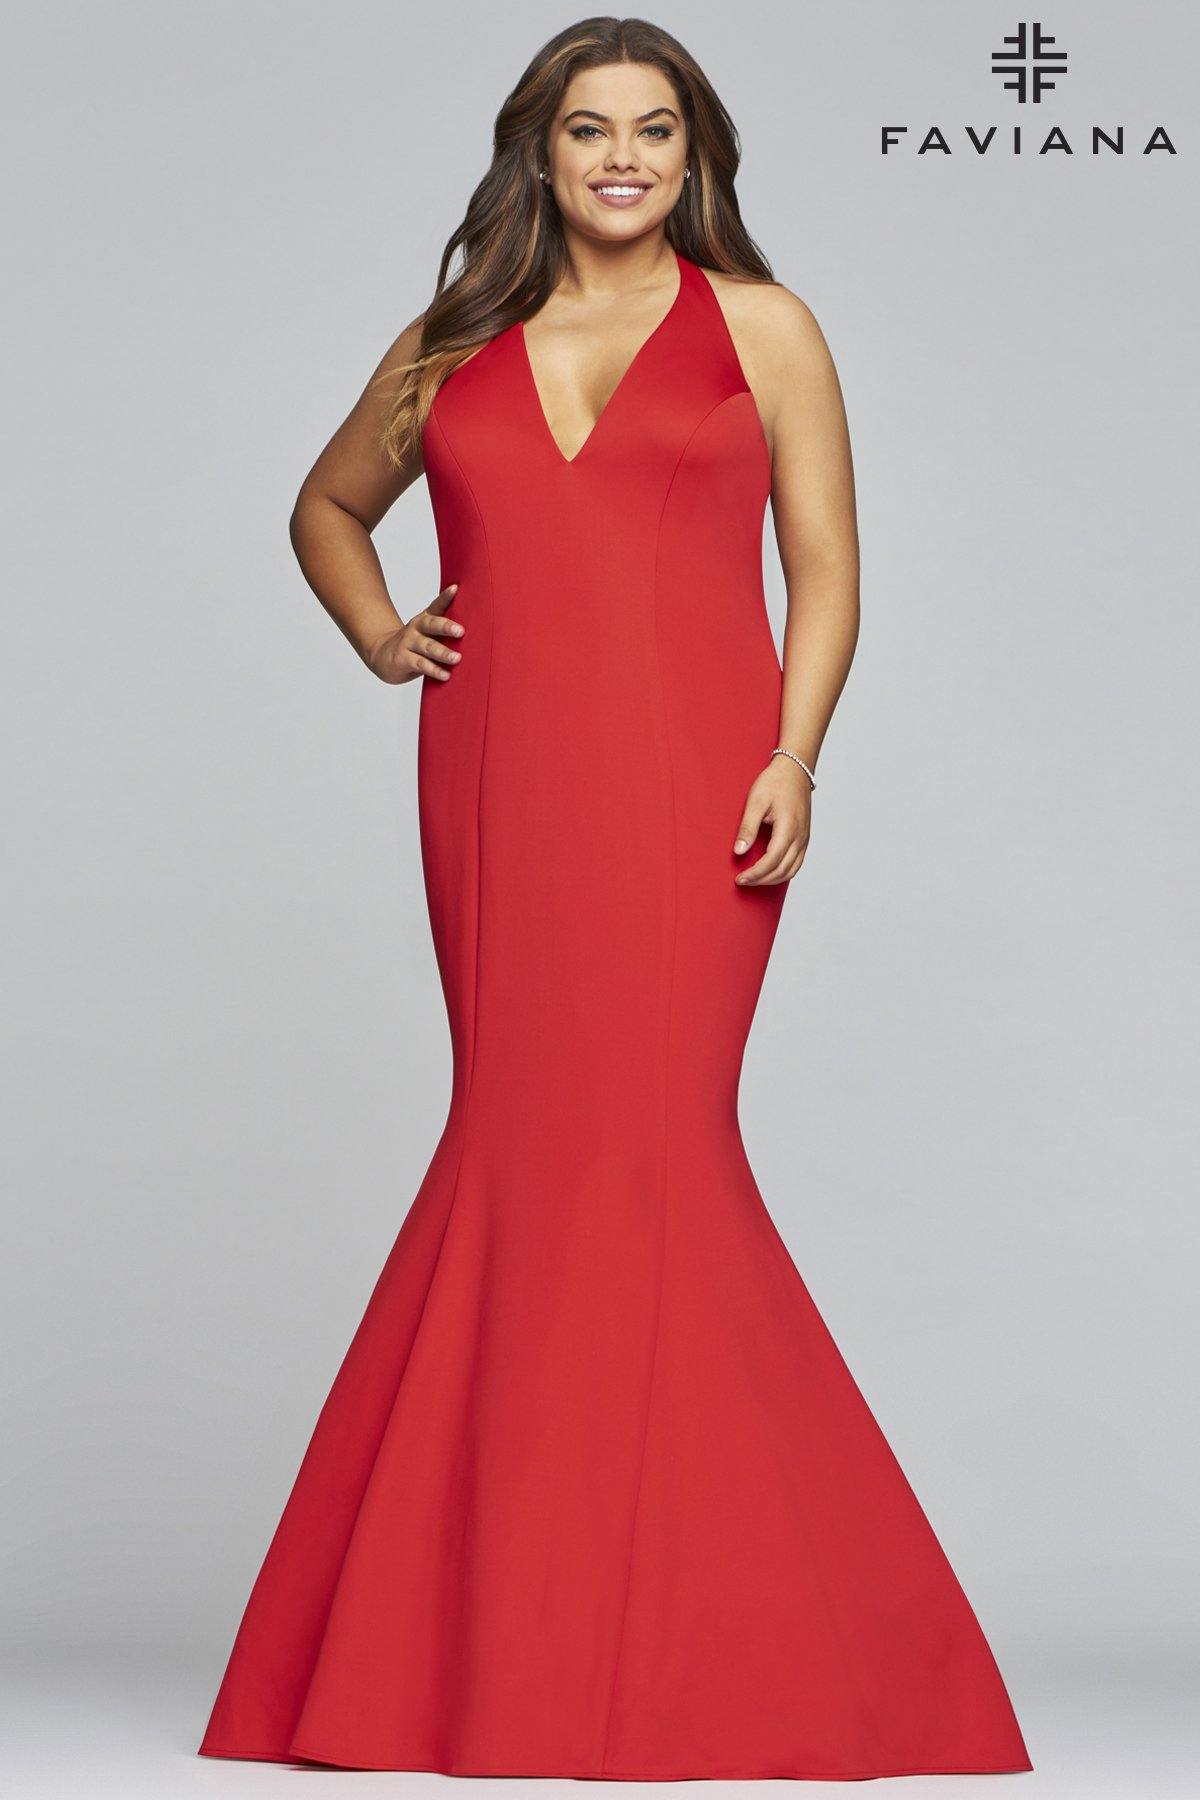 Faviana 9454 Long Fitted Jersey Evening Dress - The Dress Outlet Faviana